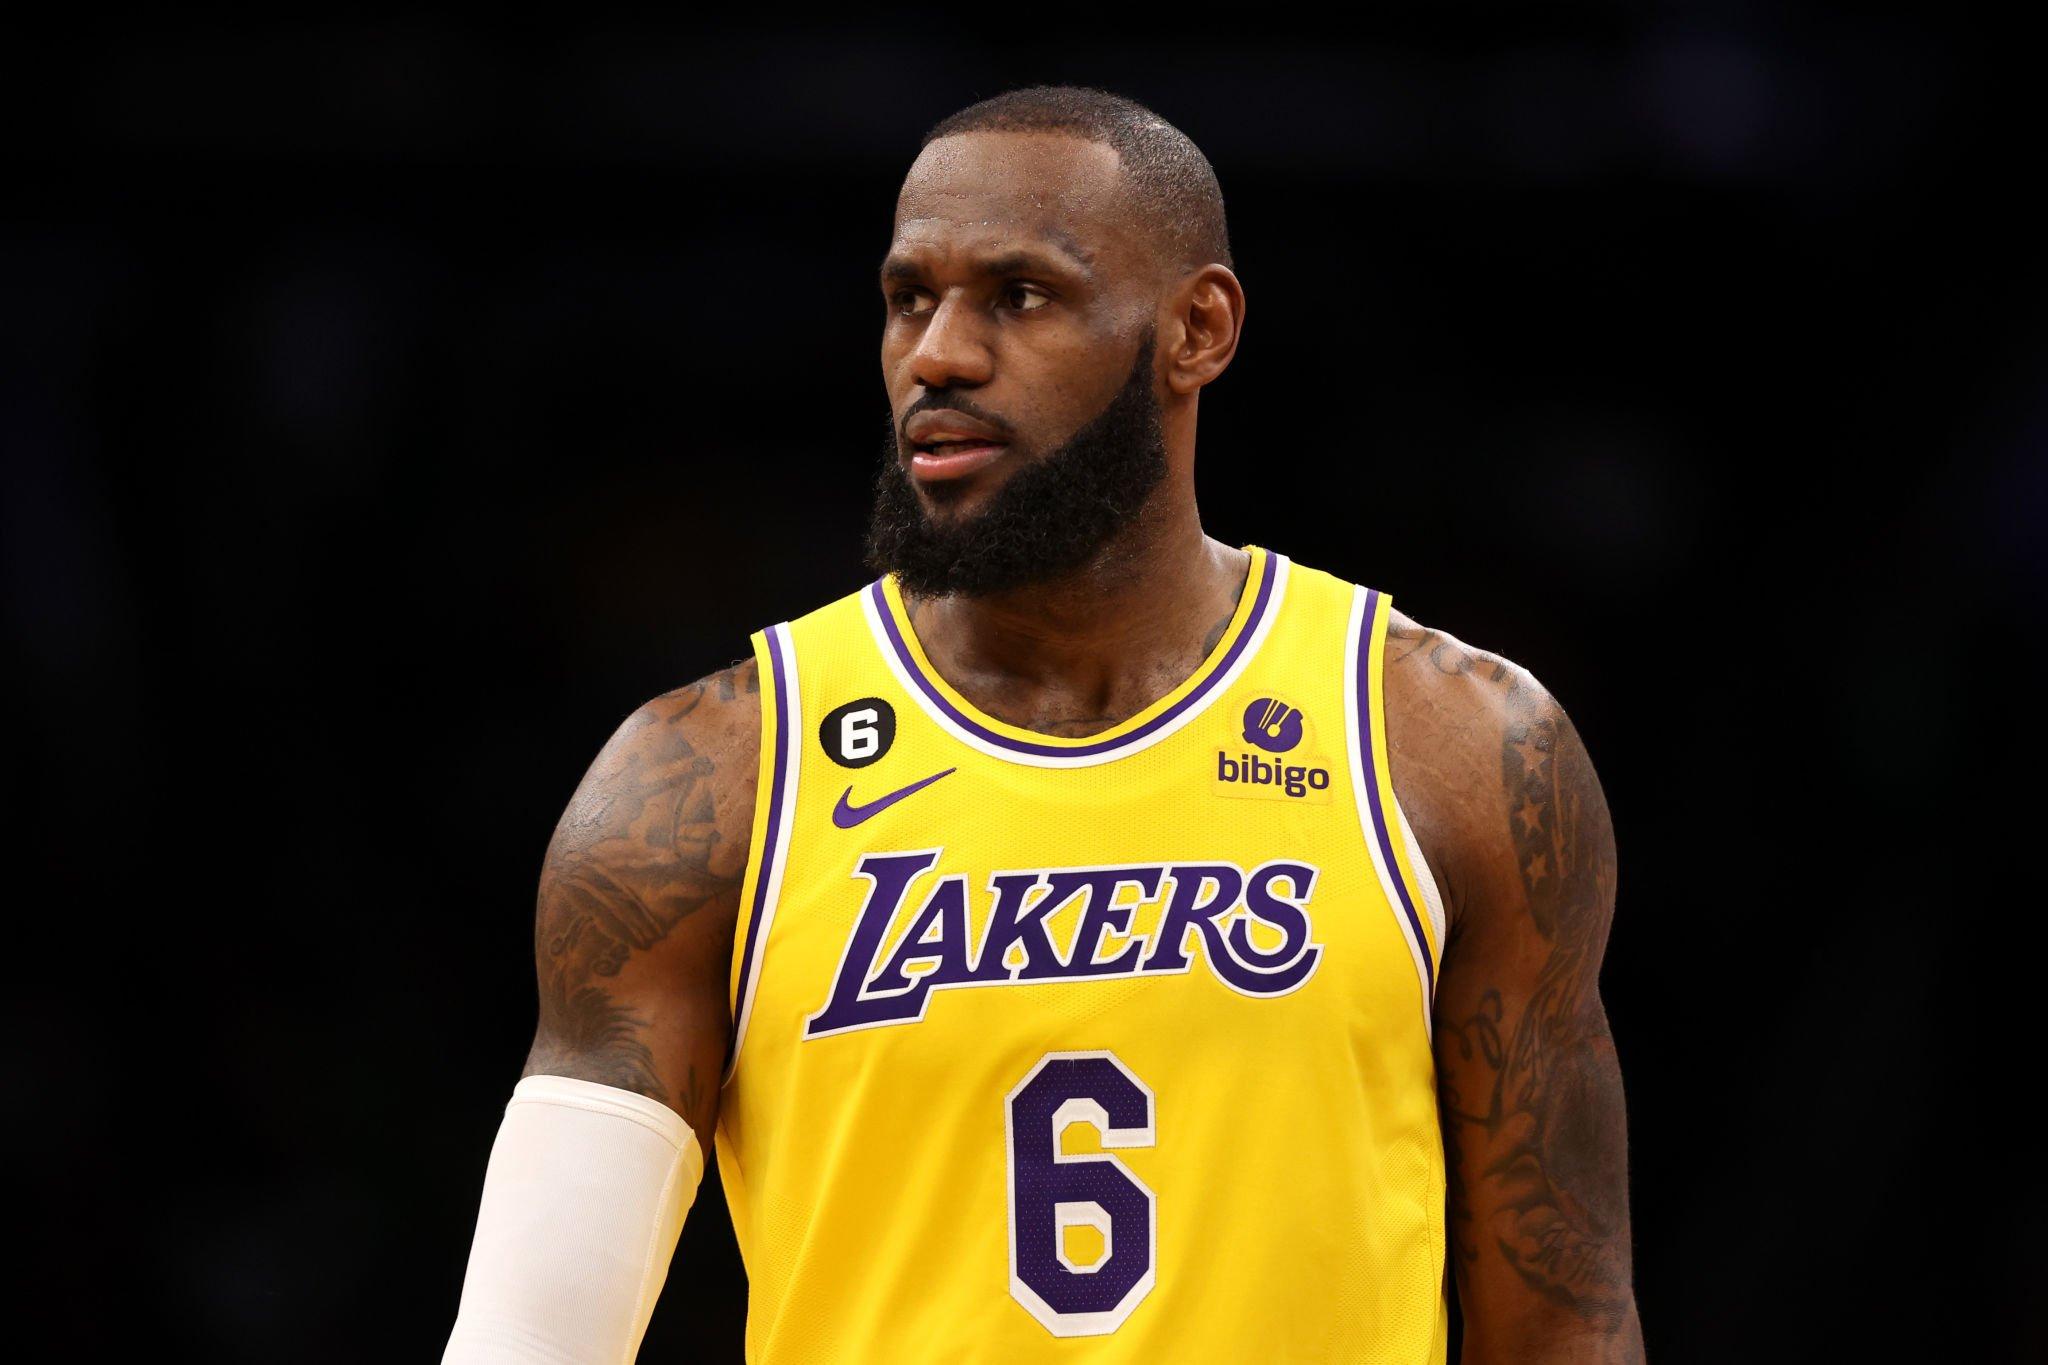 BOSTON, MASSACHUSETTS - JANUARY 28: LeBron James #6 of the Los Angeles Lakers looks on during the second half against the Boston Celtics at TD Garden on January 28, 2023 in Boston, Massachusetts. The Celtics defeat the Lakers 125-121. (Photo by Maddie Meyer/Getty Images)